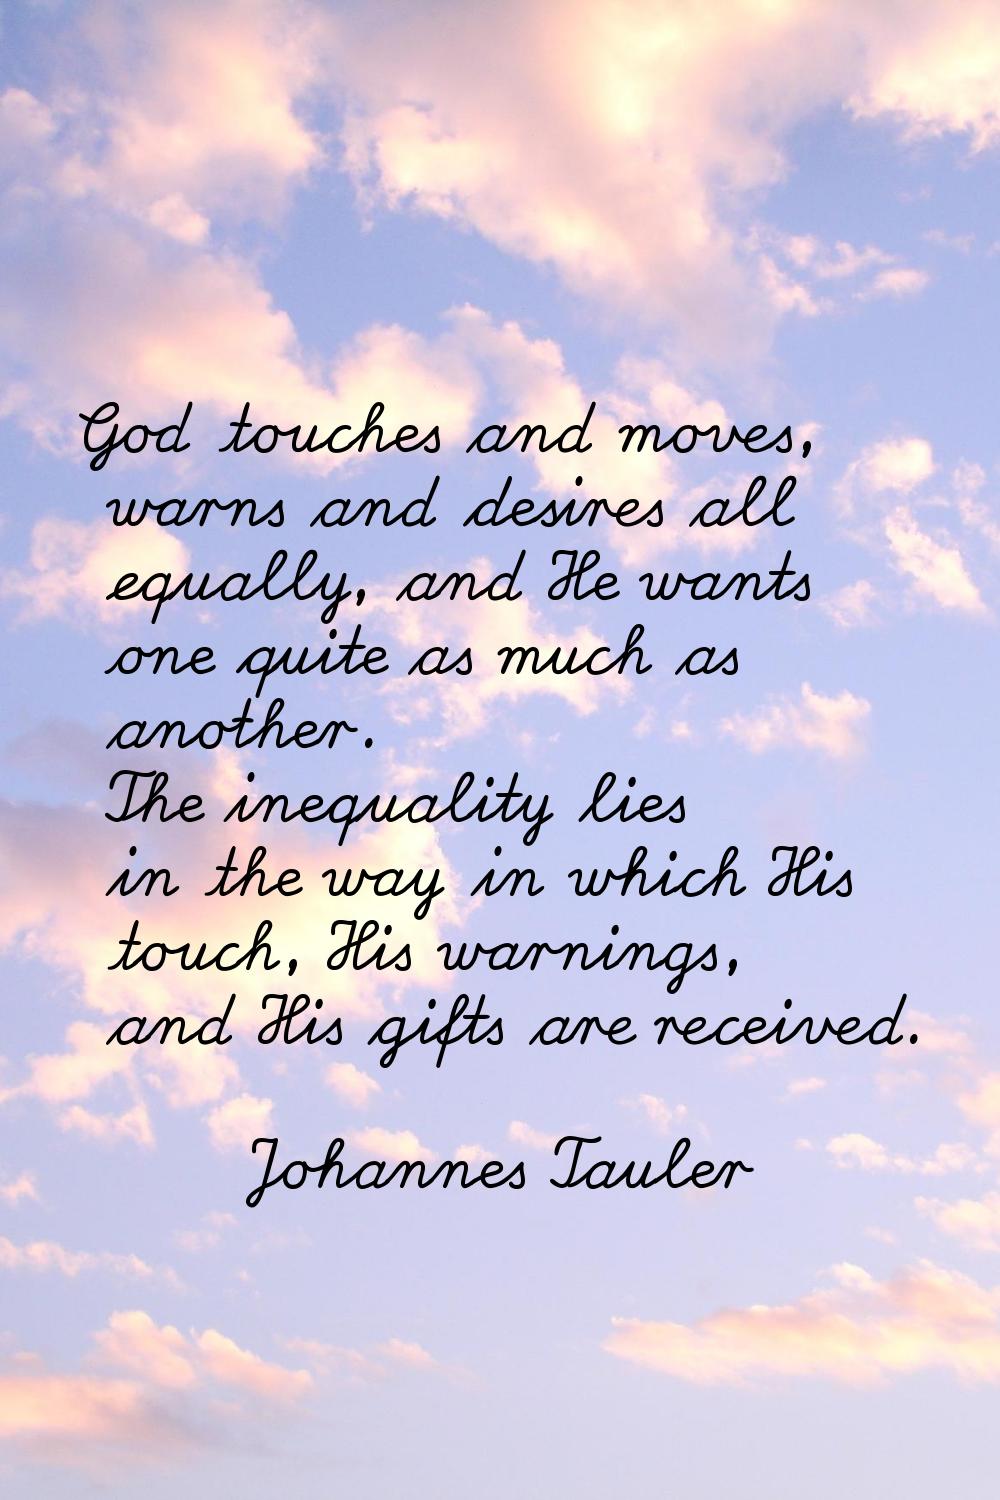 God touches and moves, warns and desires all equally, and He wants one quite as much as another. Th